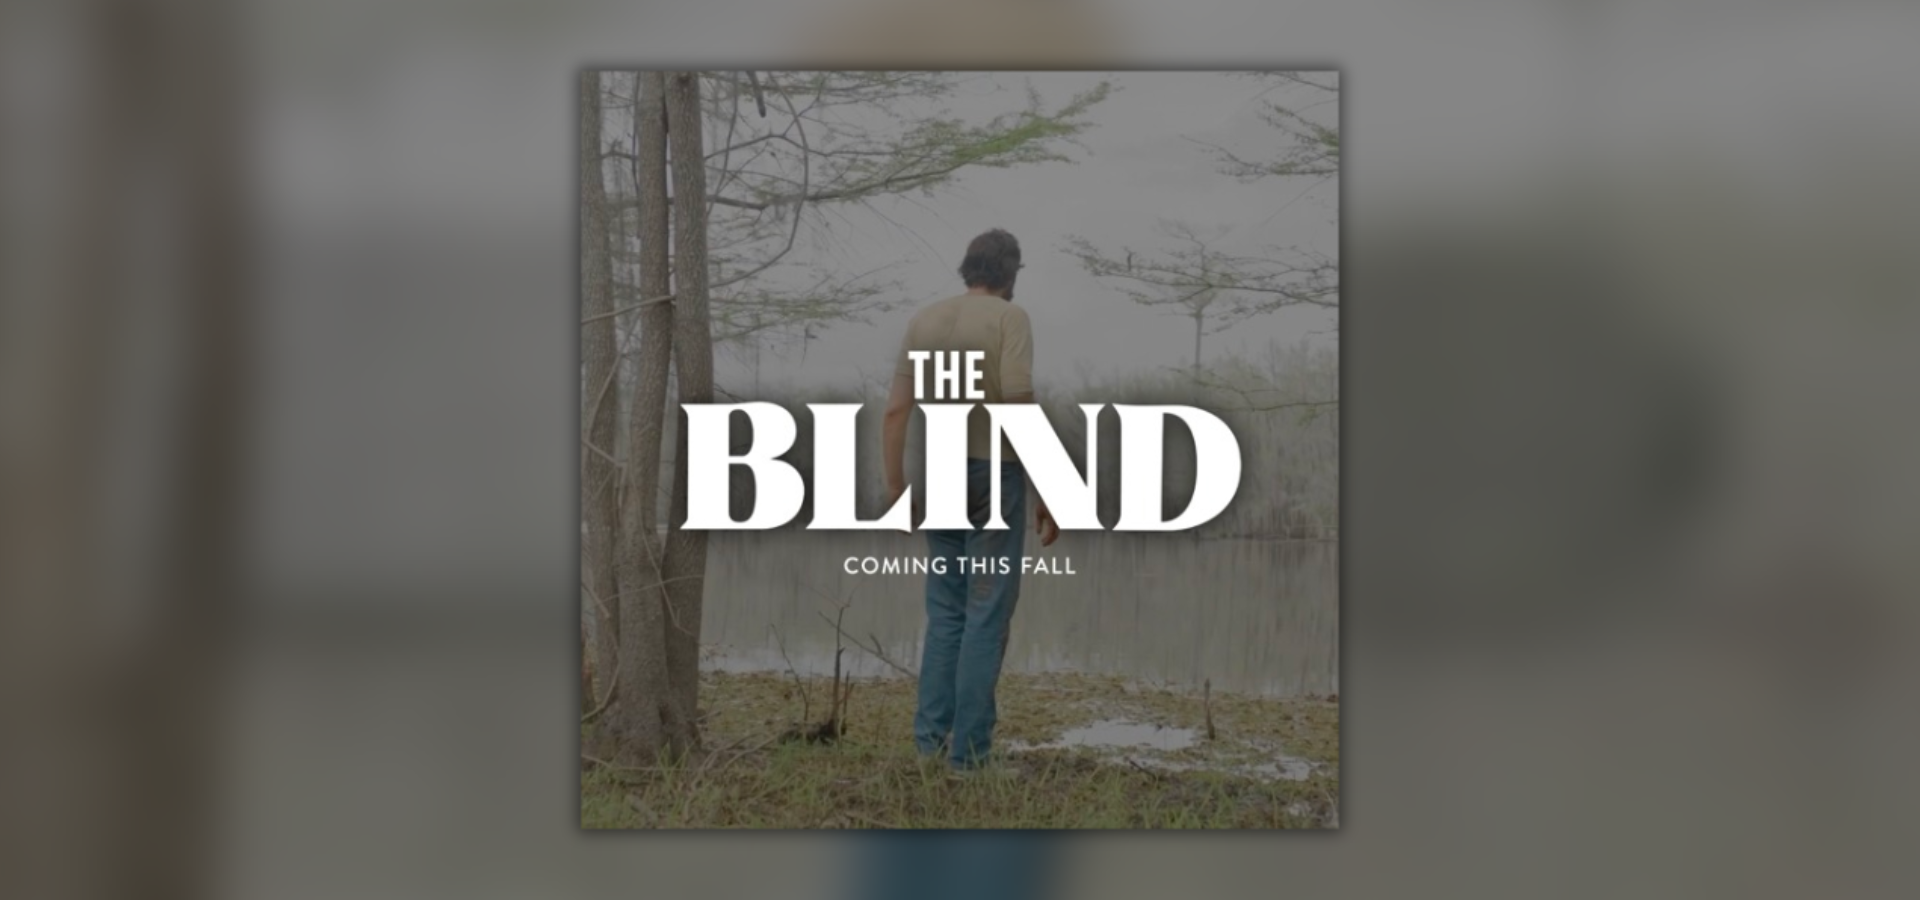 TRAILER: The Blind, The True Story of the Robertson Family